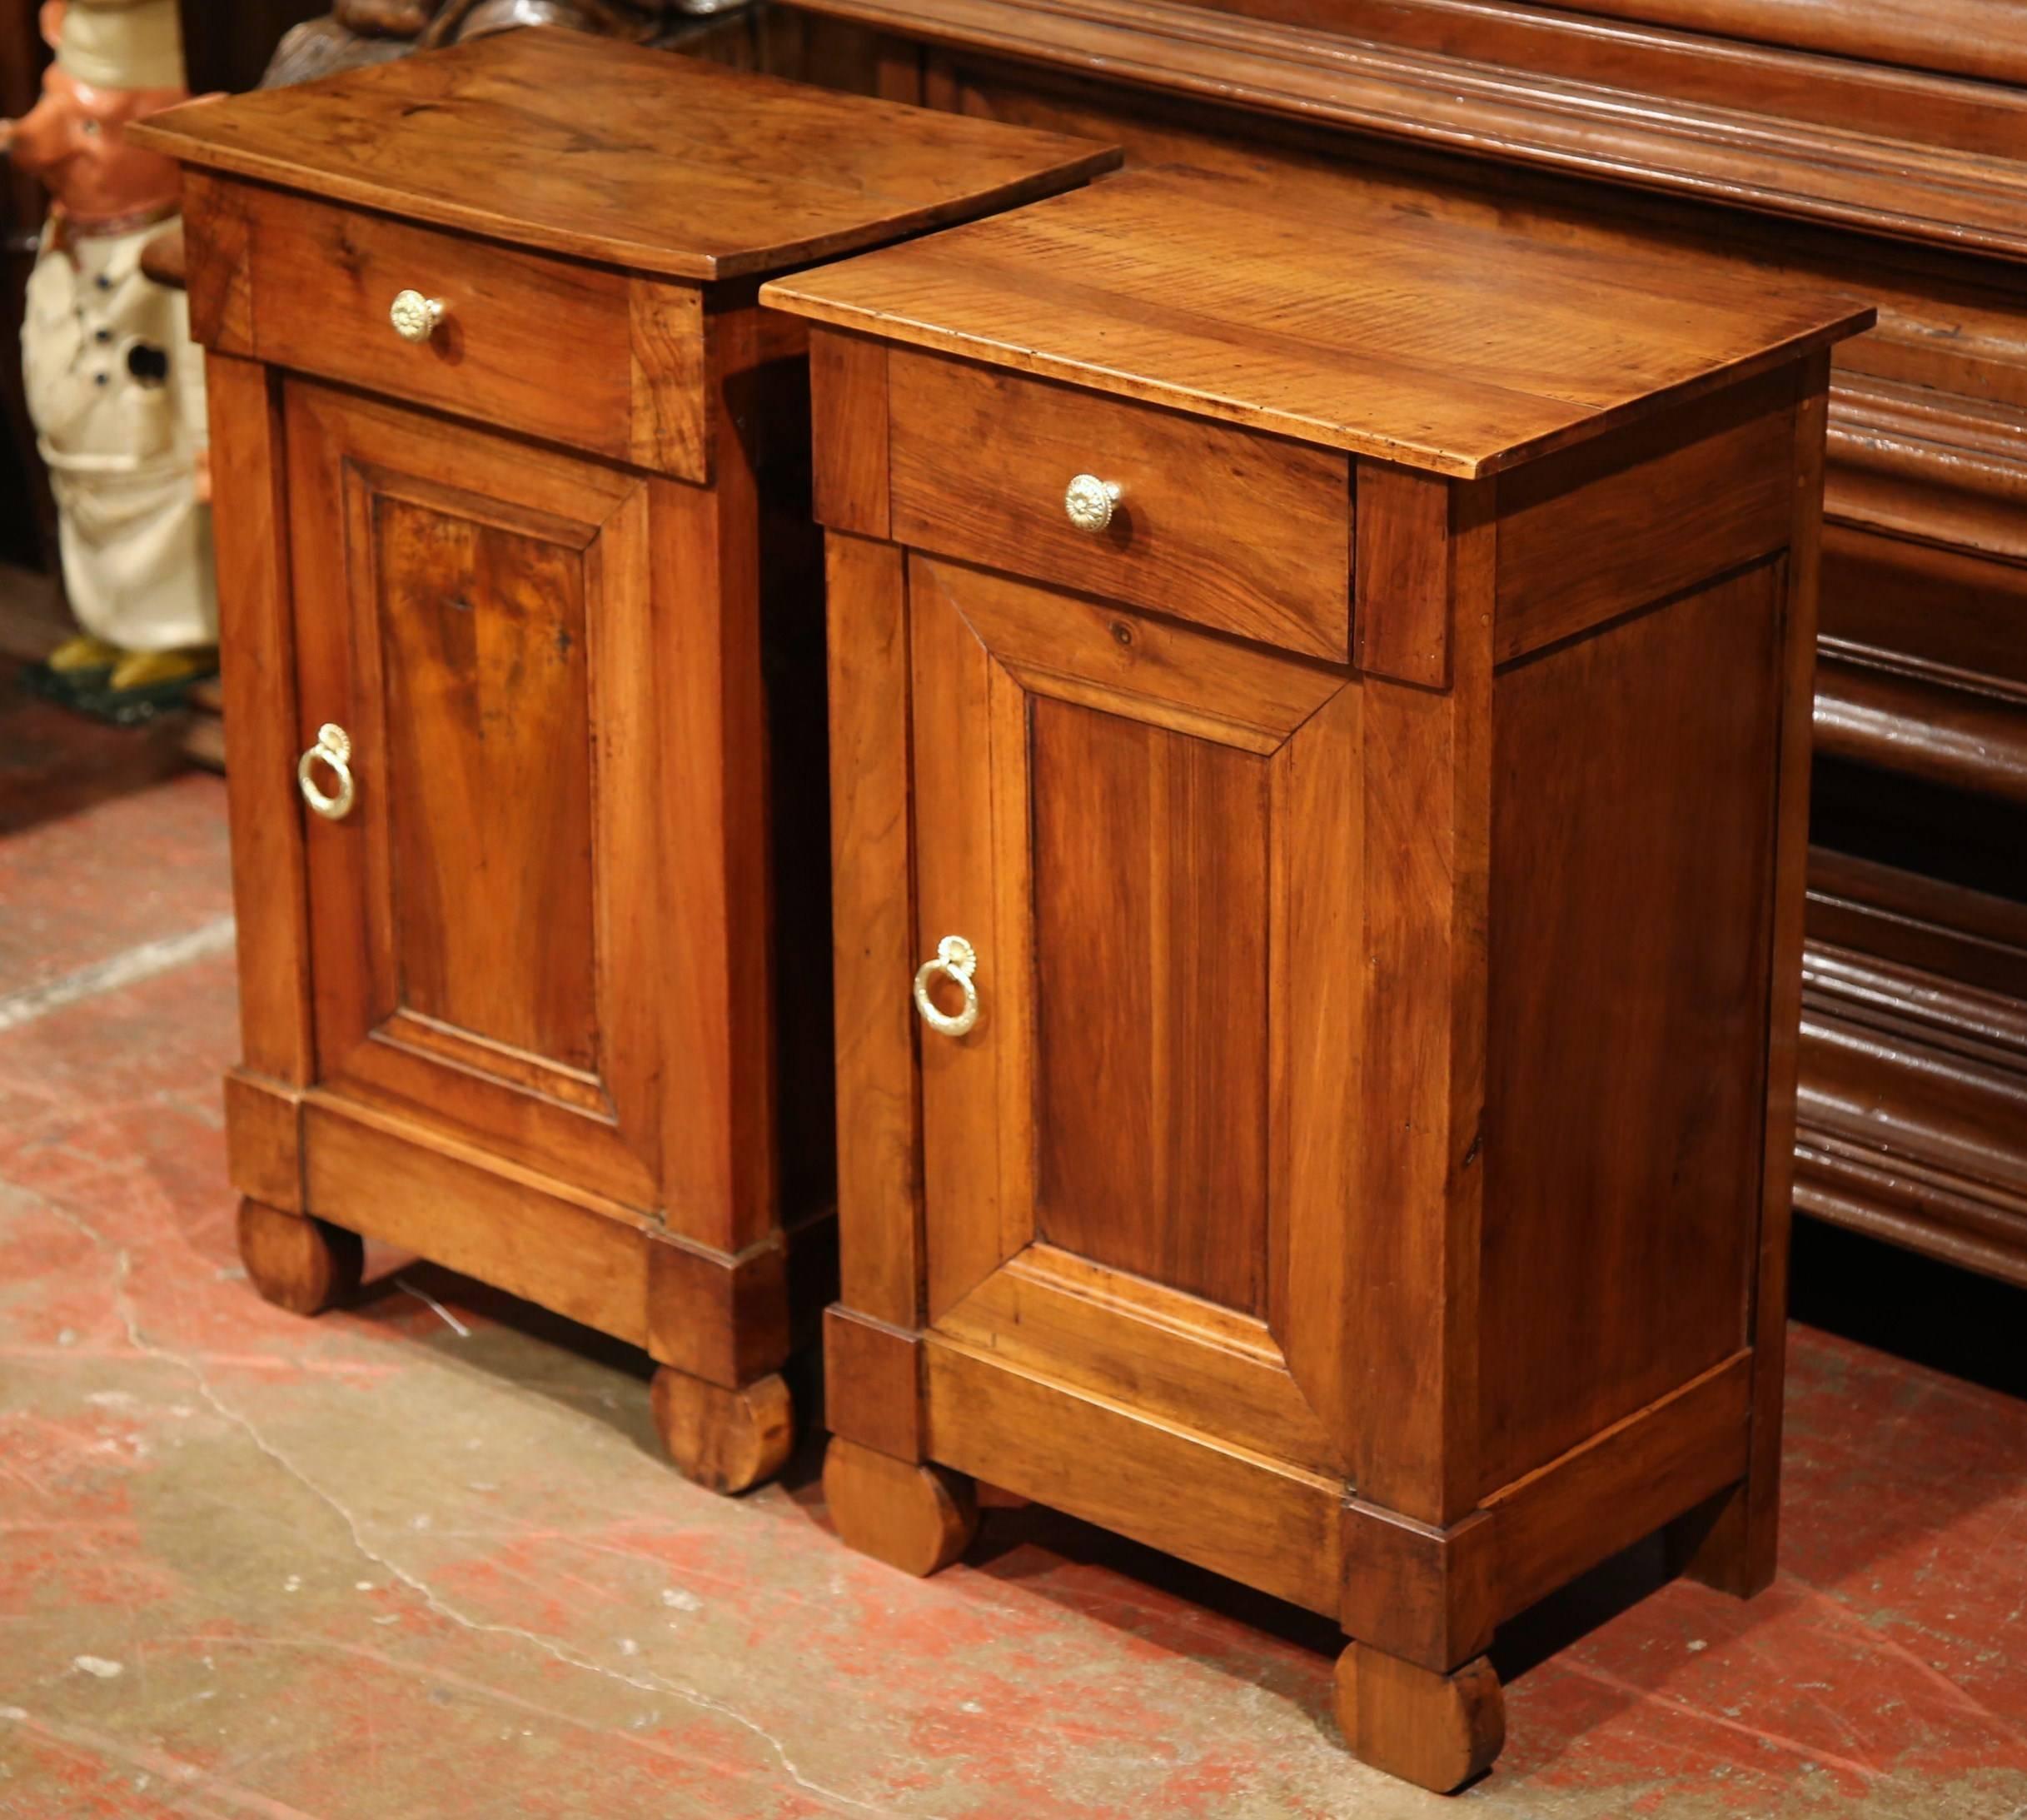 Add surface space in your bedroom with this elegant pair of antique fruitwood nightstands from France. Crafted circa 1890, each of these classic cabinets features a centre drawer with cupboard door underneath. In the traditional Louis Philippe